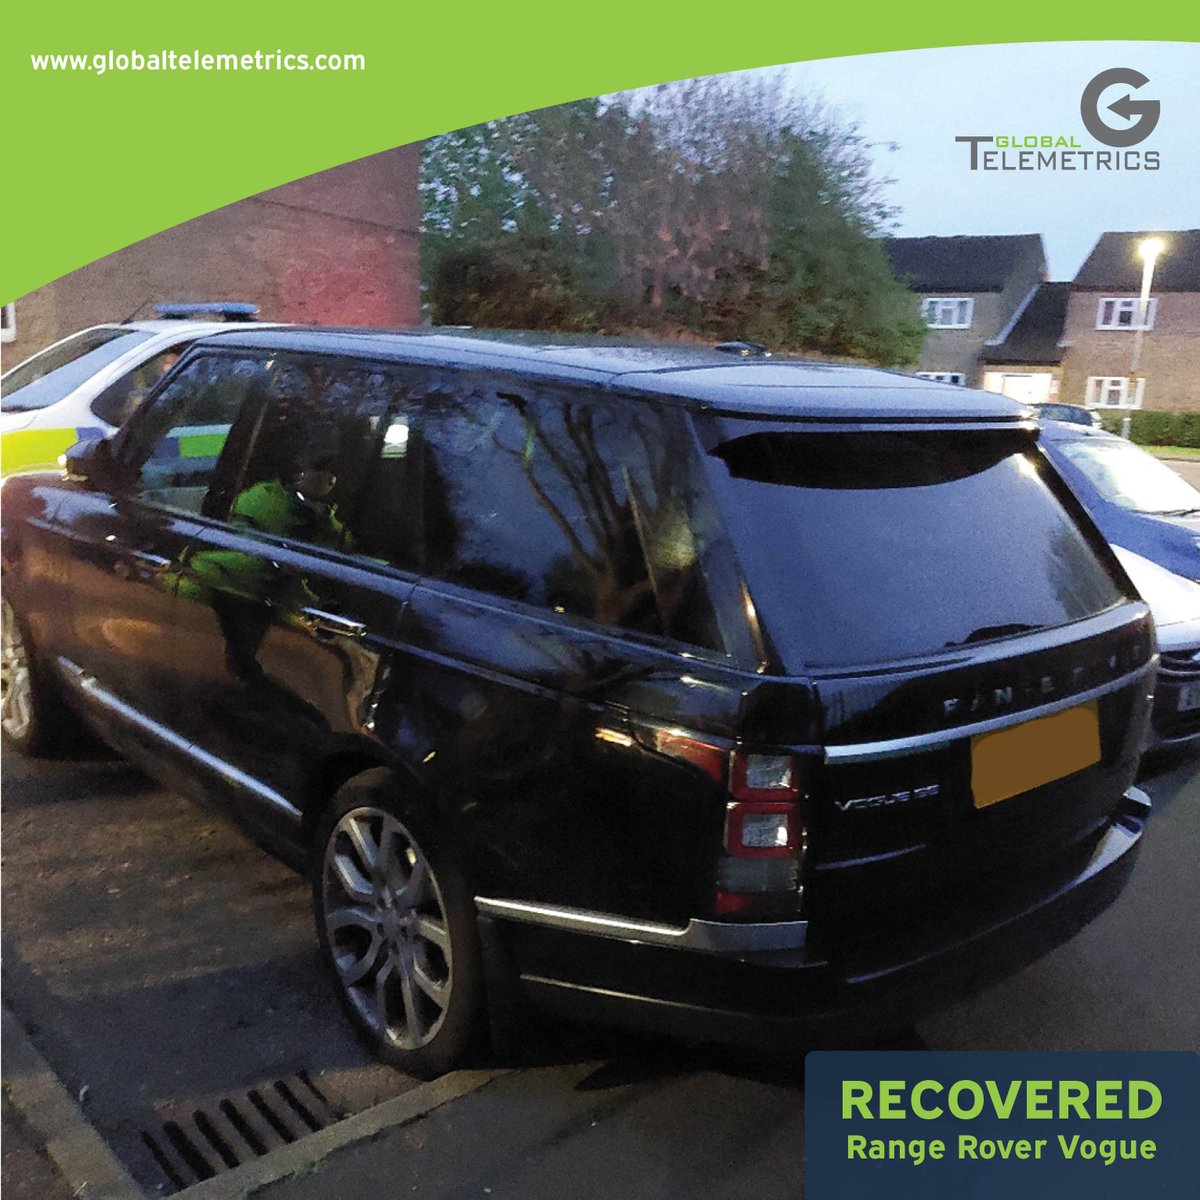 Taken from our customers driveway by relay theft in the early hours of the morning, this Range Rover Vogue was recovered in under 90 minutes by our Repatriations Team and the police.

#DisruptingCriminality #ItPaysToInvestInSecurity #ProtectWhatsYours #RangeRover #Vogue…